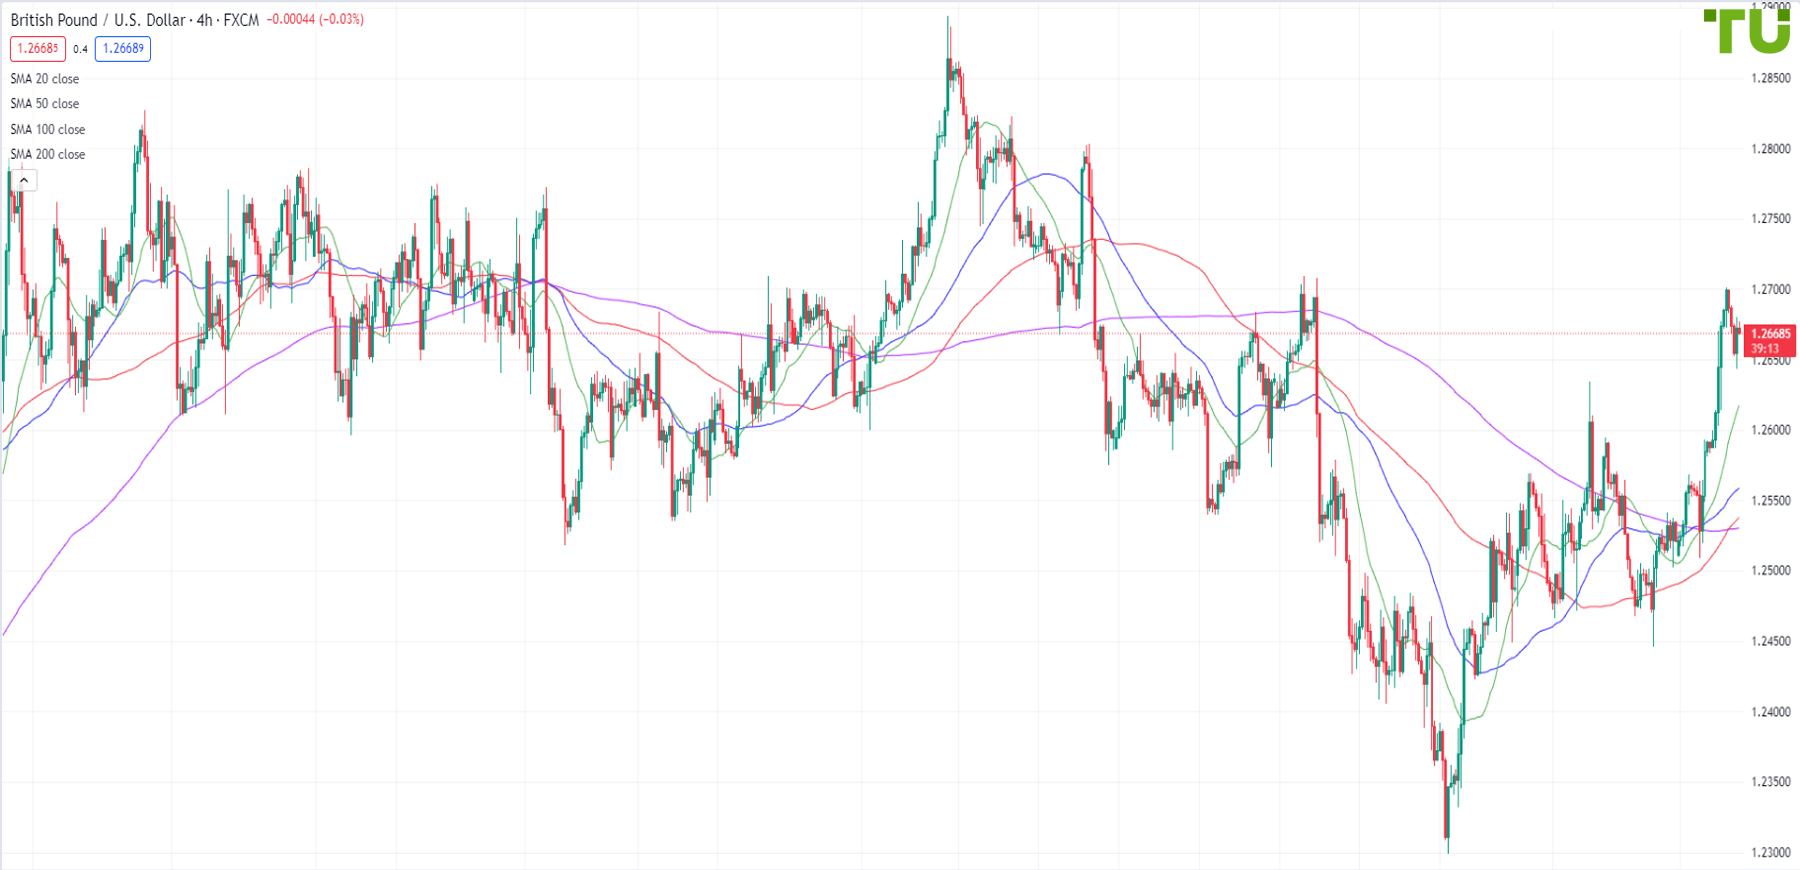 GBP/USD is declining after an increase